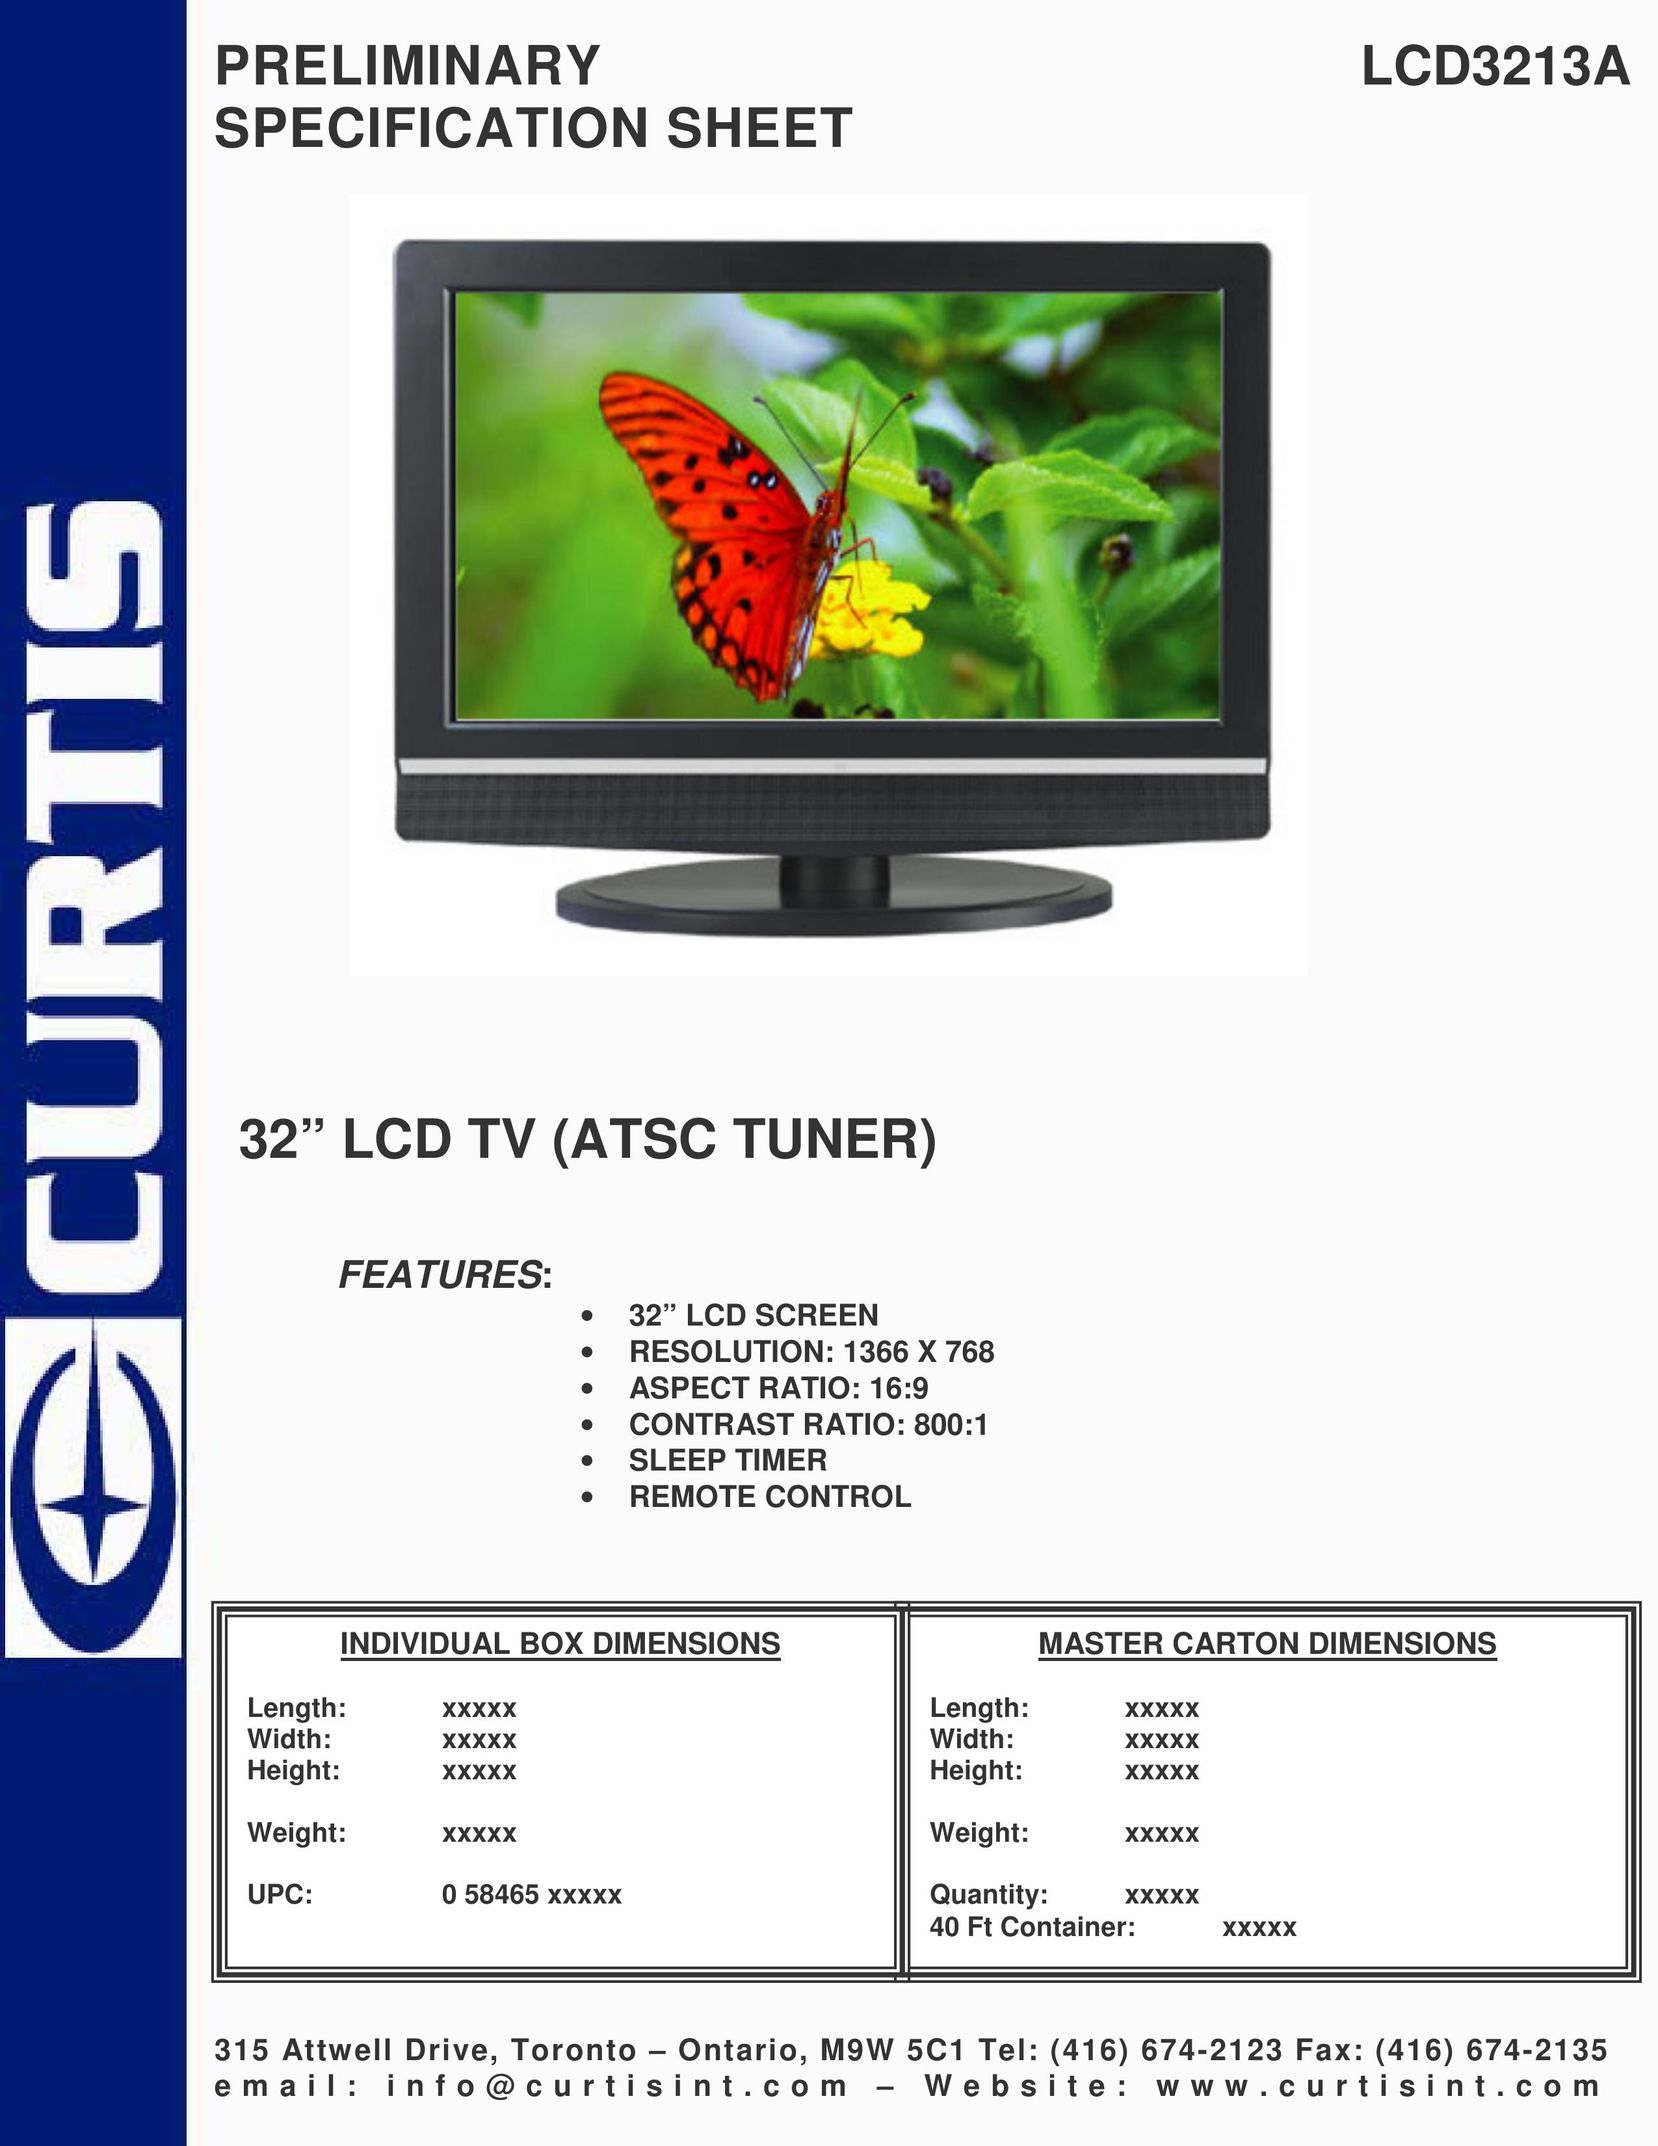 Curtis LCD3213A Flat Panel Television User Manual